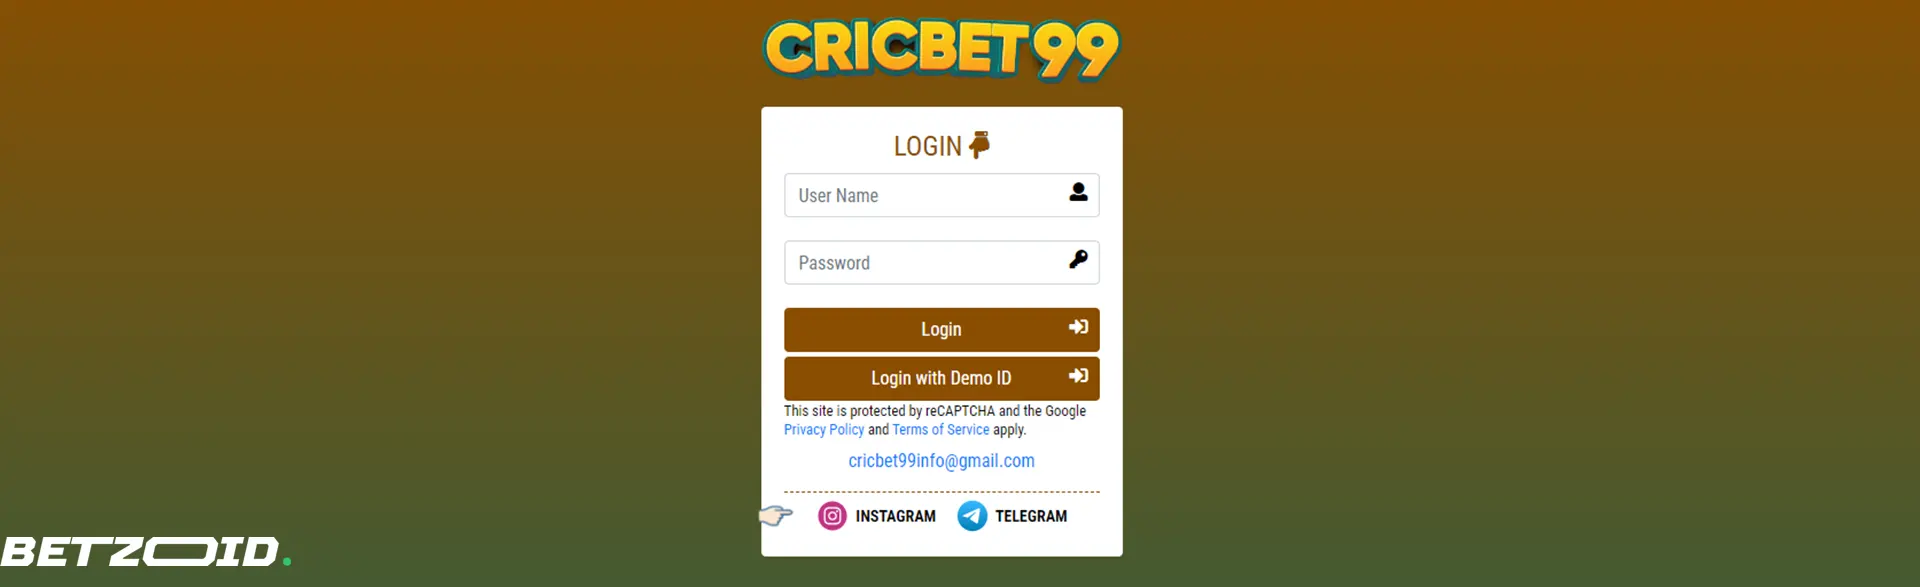 Cricbet99 login interface for betting.